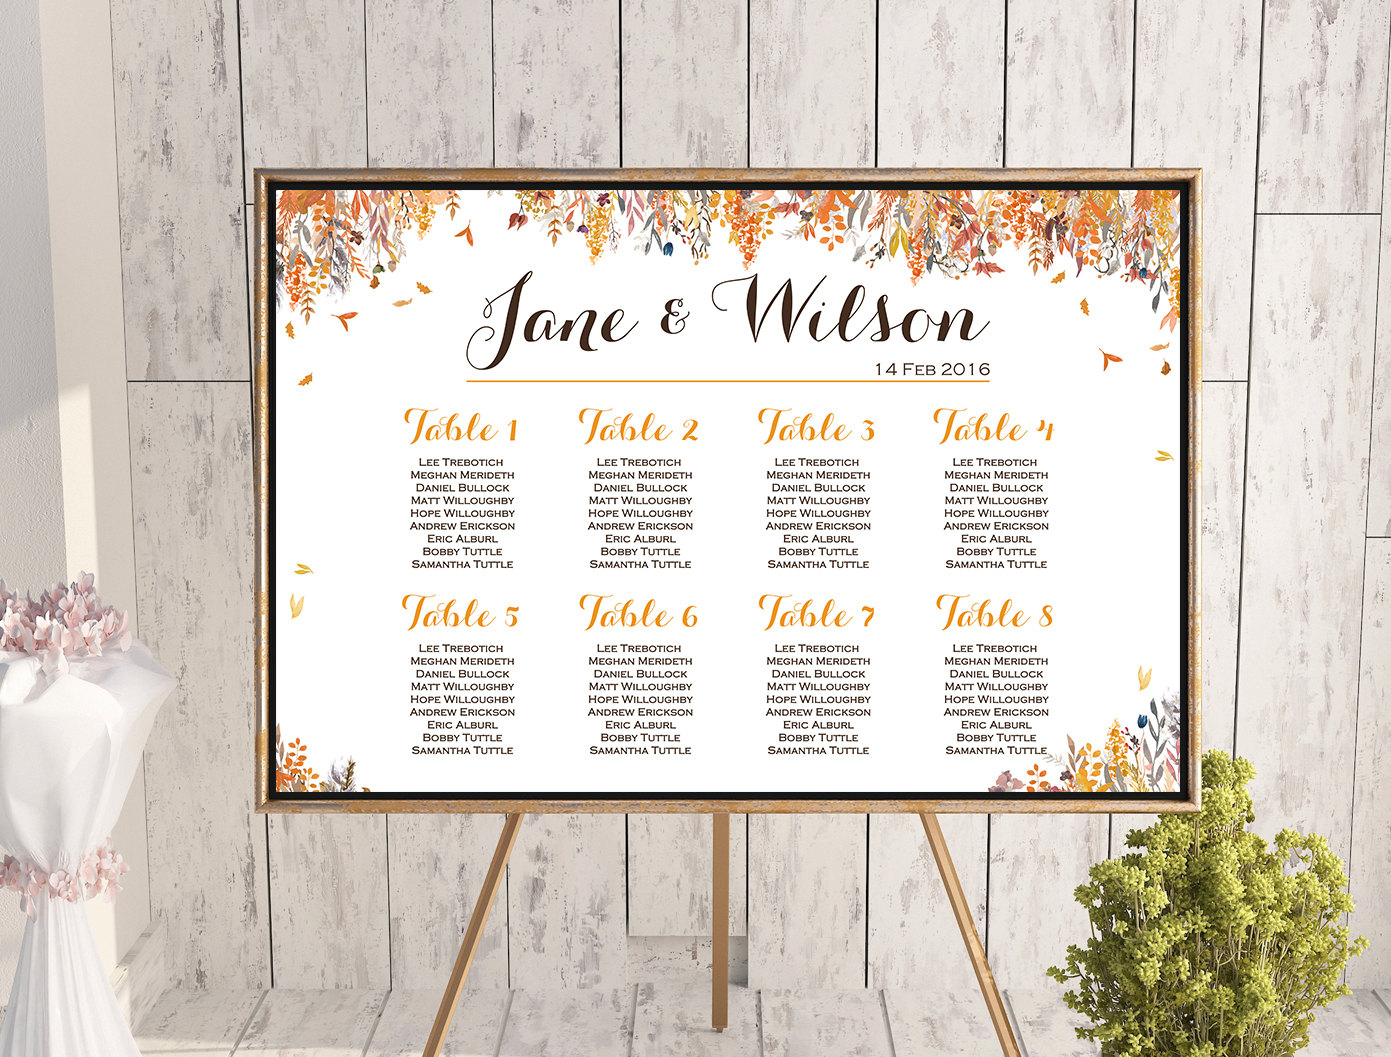 Wedding Seating Chart Template from www.brideandbows.com